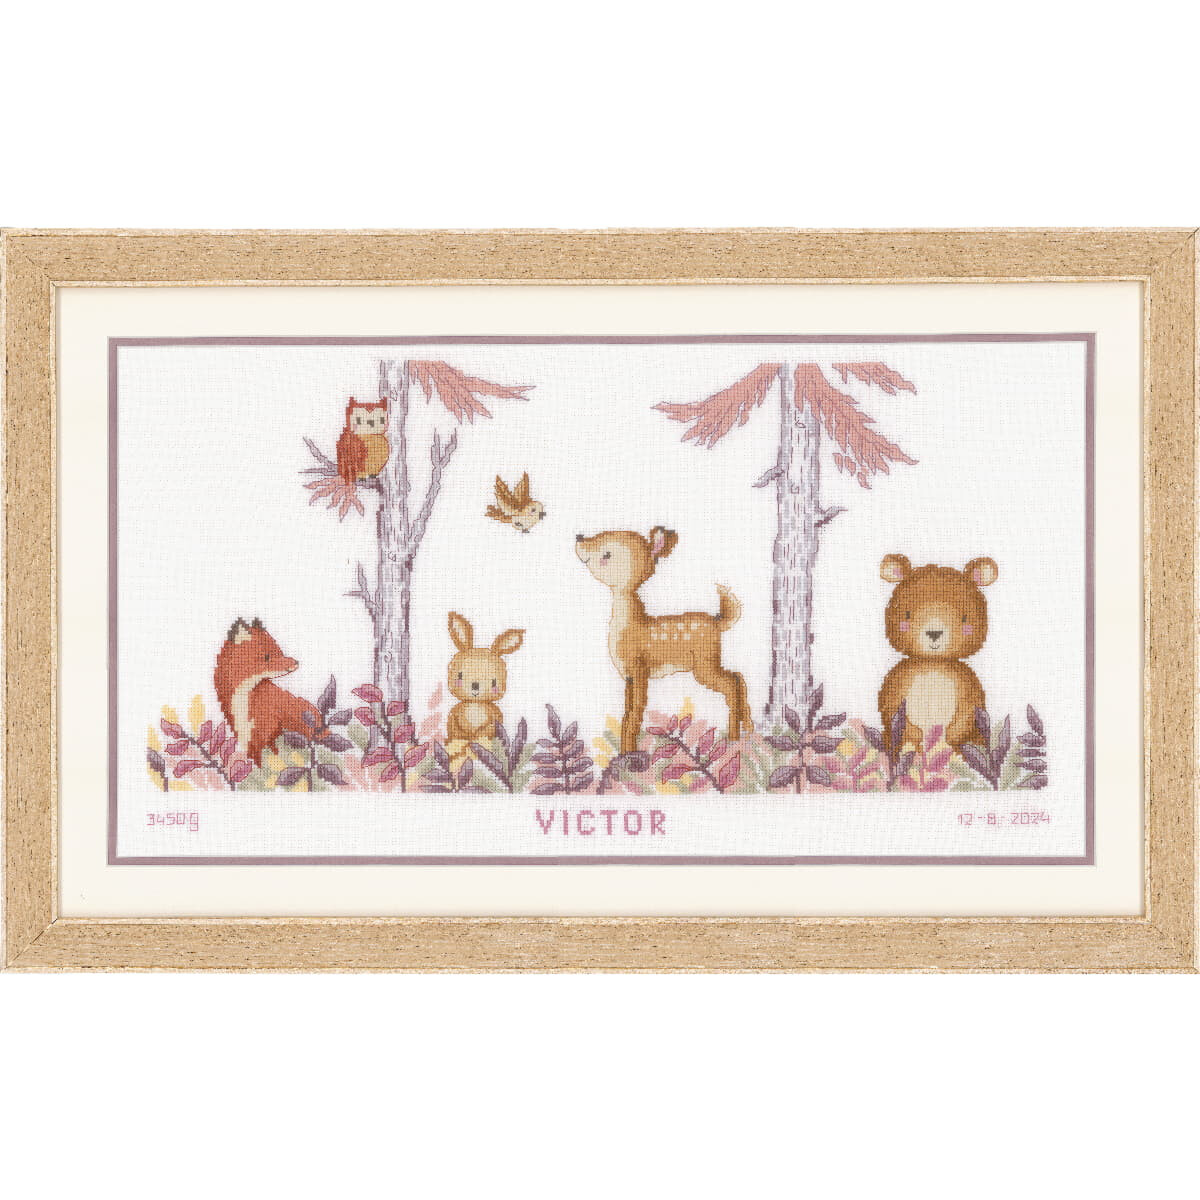 Vervaco counted cross stitch kit "In the...